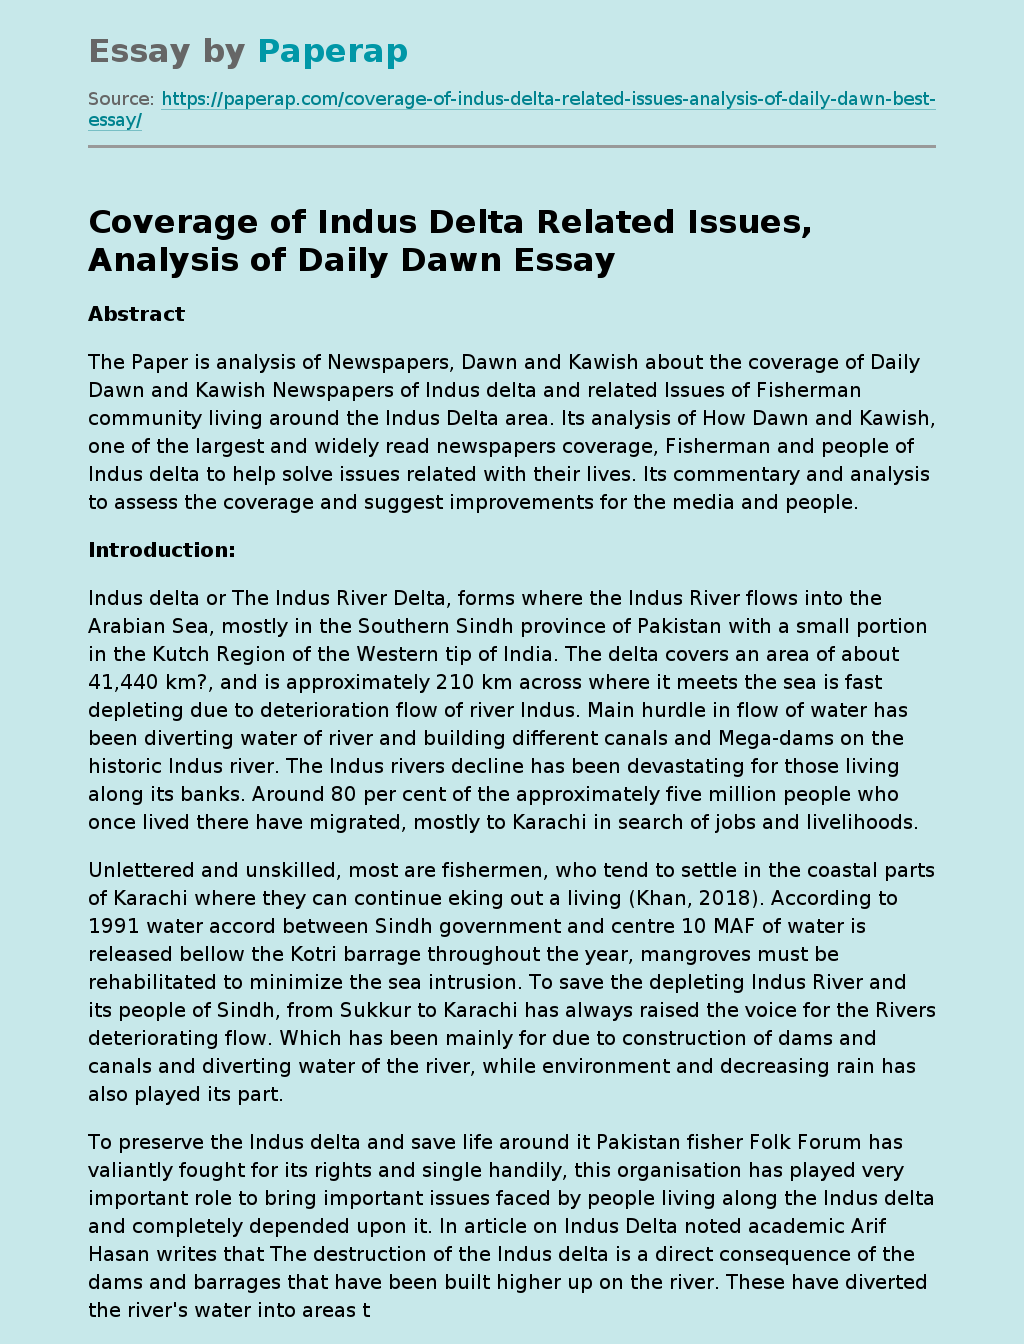 Coverage of Indus Delta Related Issues, Analysis of Daily Dawn